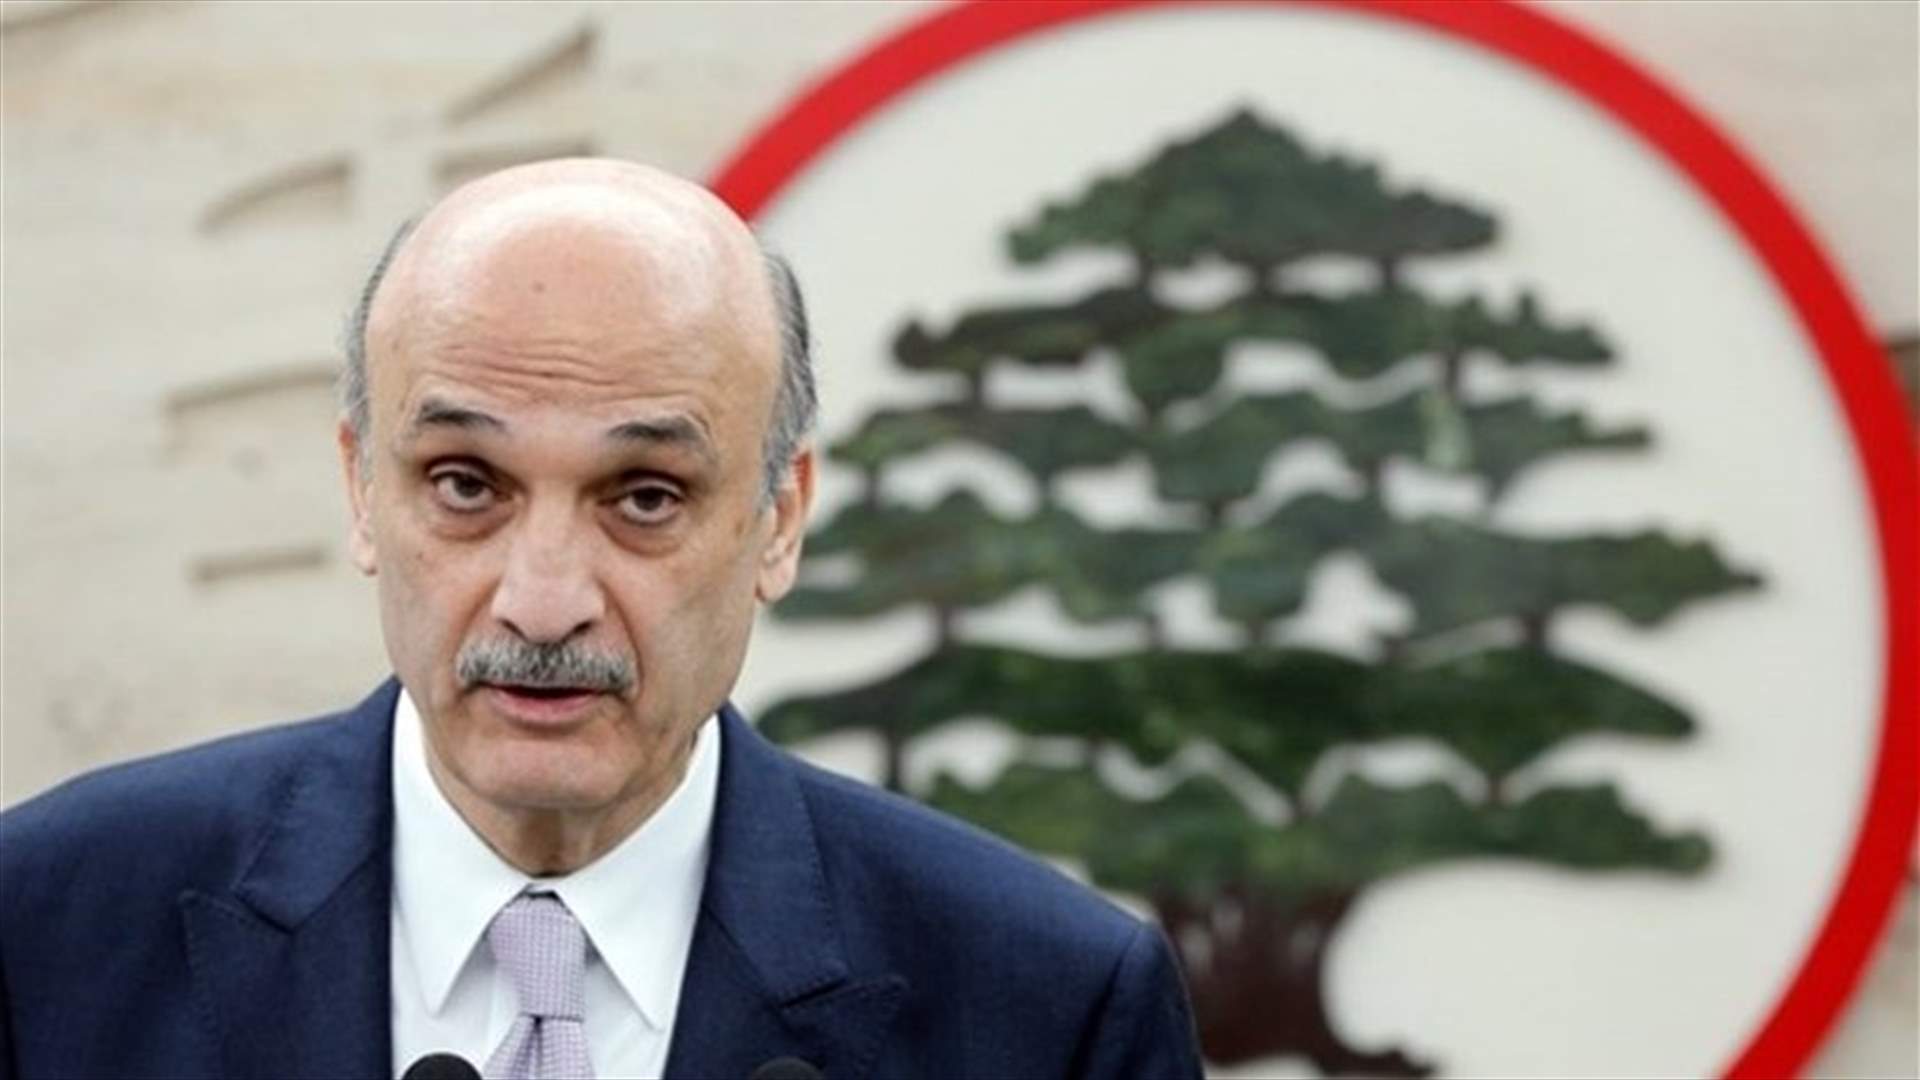 Geagea calls on Hariri to speed up compensations for residents of Ras Baalbek, al-Qaa, and Hermel